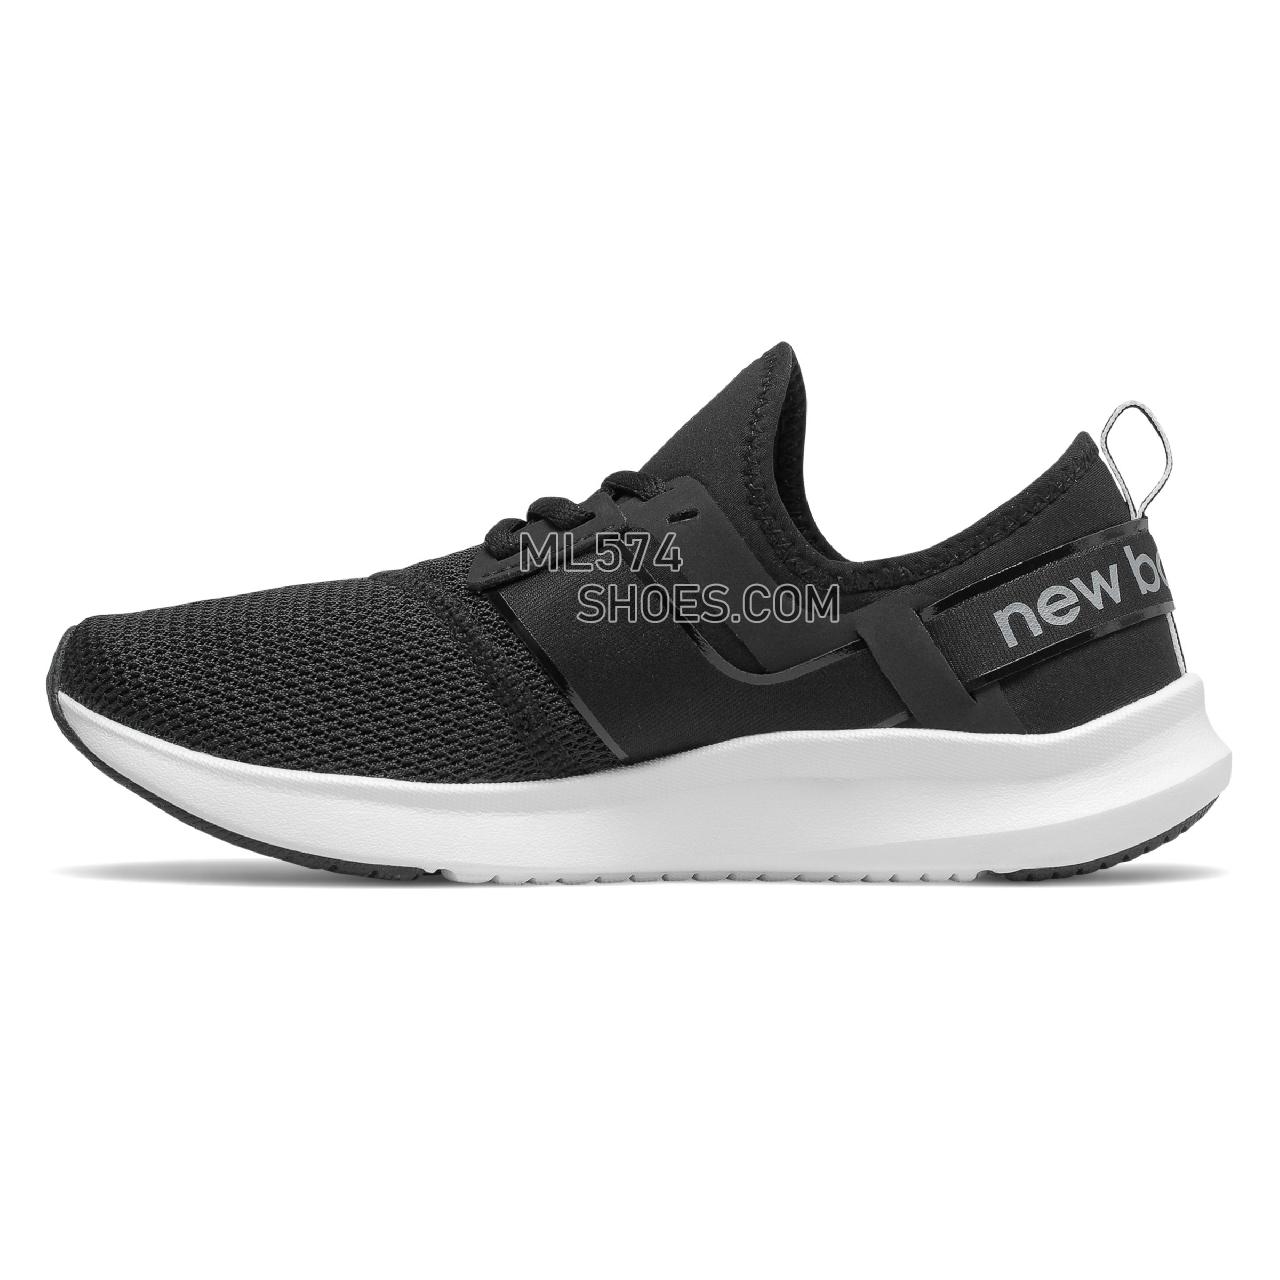 New Balance NB Nergize Sport - Women's Sport Style Sneakers - Black with White Metallic - WNRGSSB1